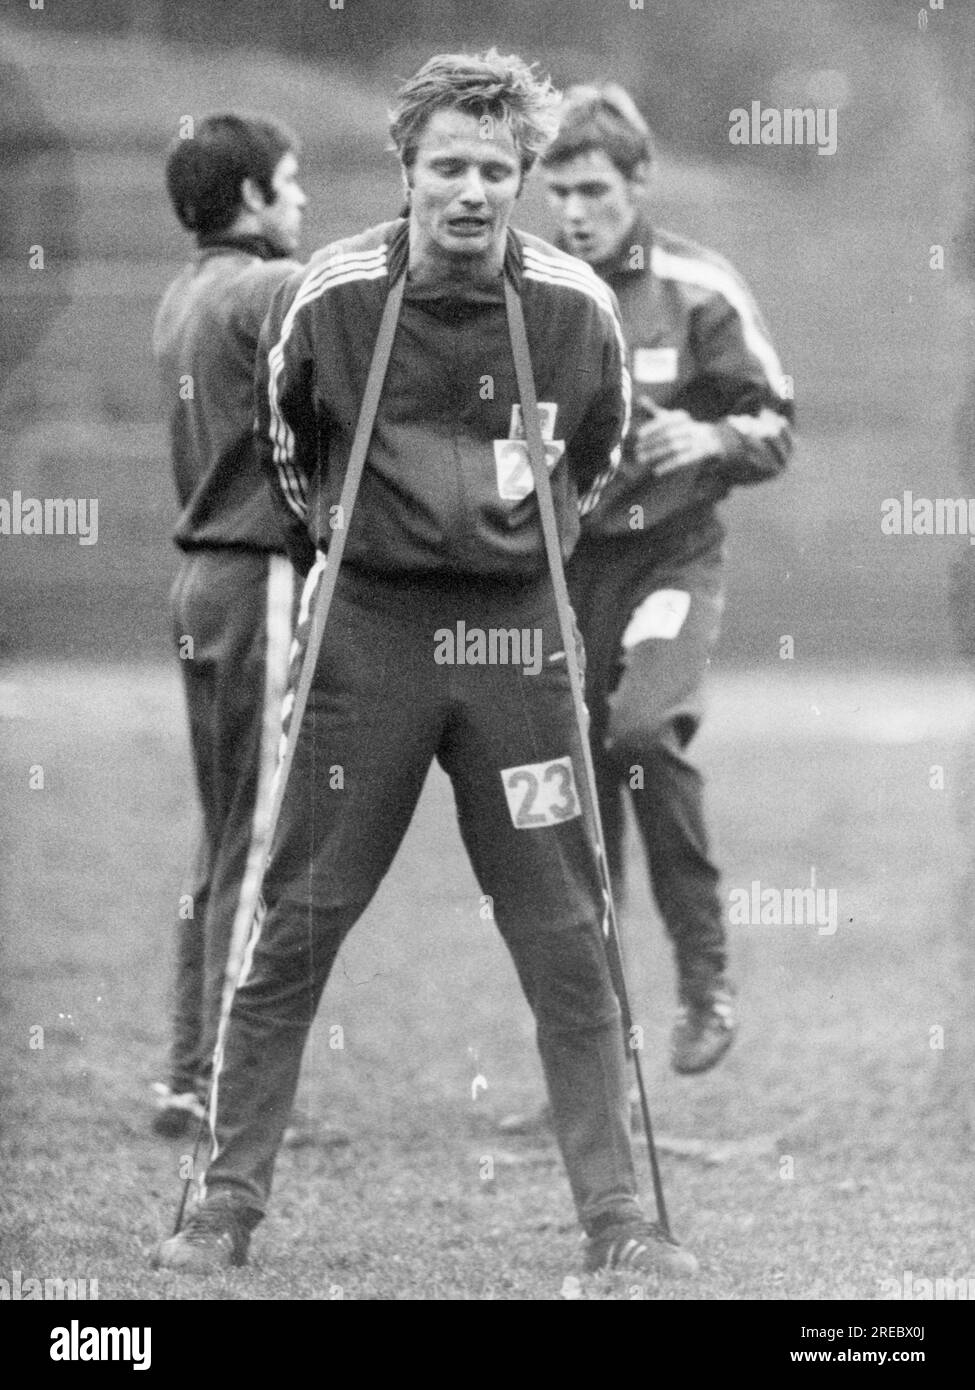 Varga, Zoltan, 1.1.1945 - 9.4.2010, Hungarian football player, middle forward of Hertha BSC, training, ADDITIONAL-RIGHTS-CLEARANCE-INFO-NOT-AVAILABLE Stock Photo